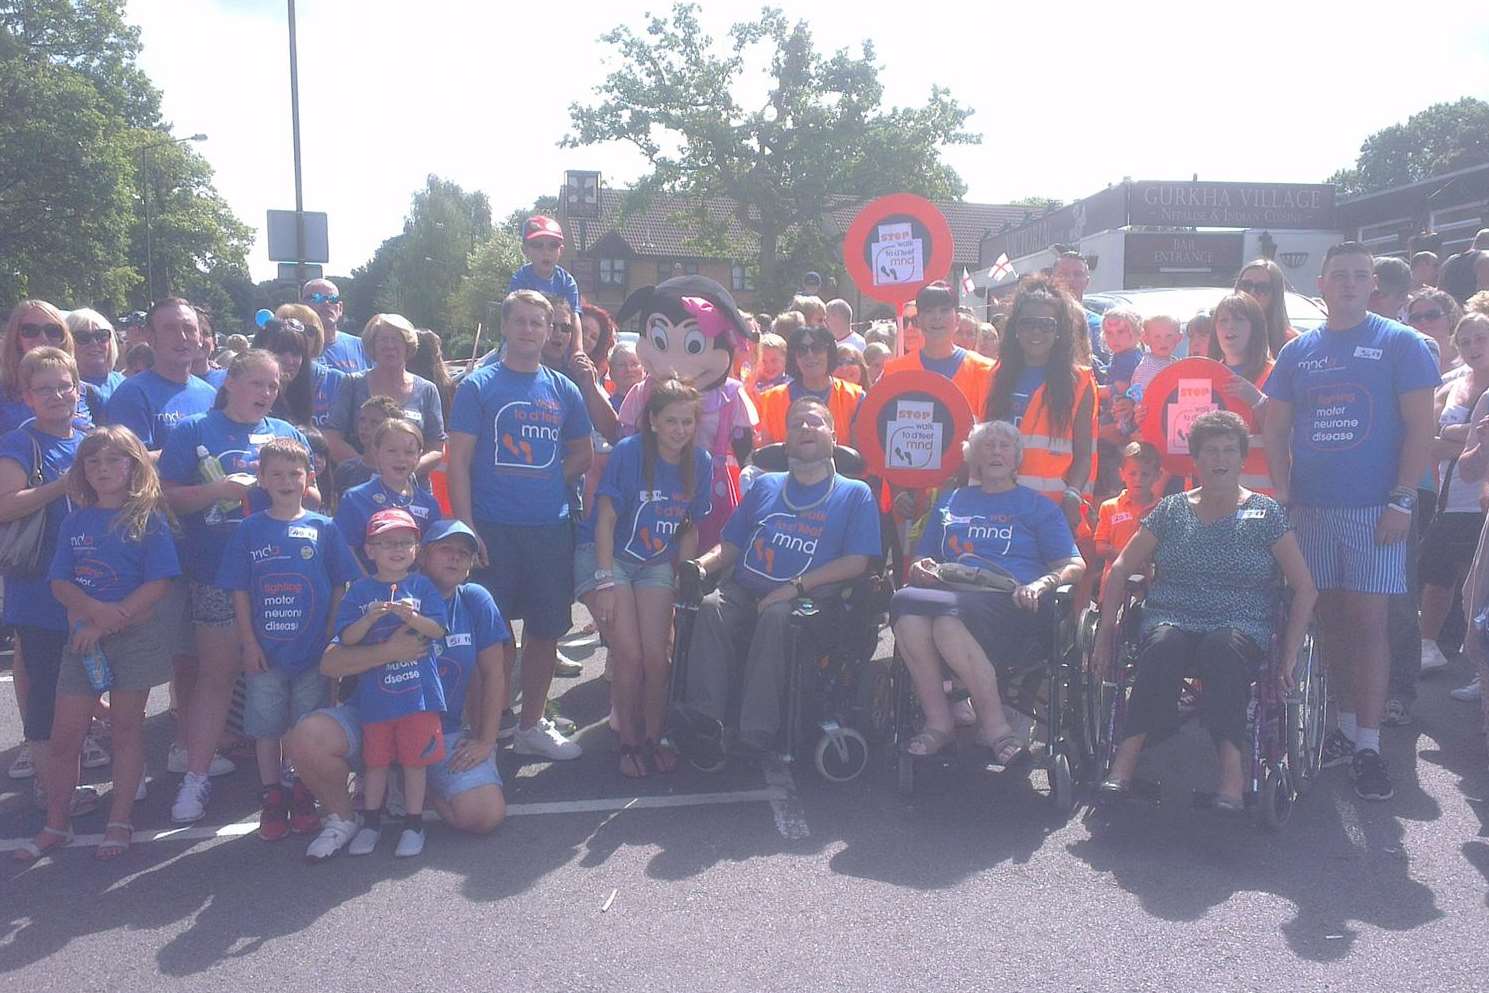 The Walk to D'Feet Sponsored Walk in August raised over £7500.